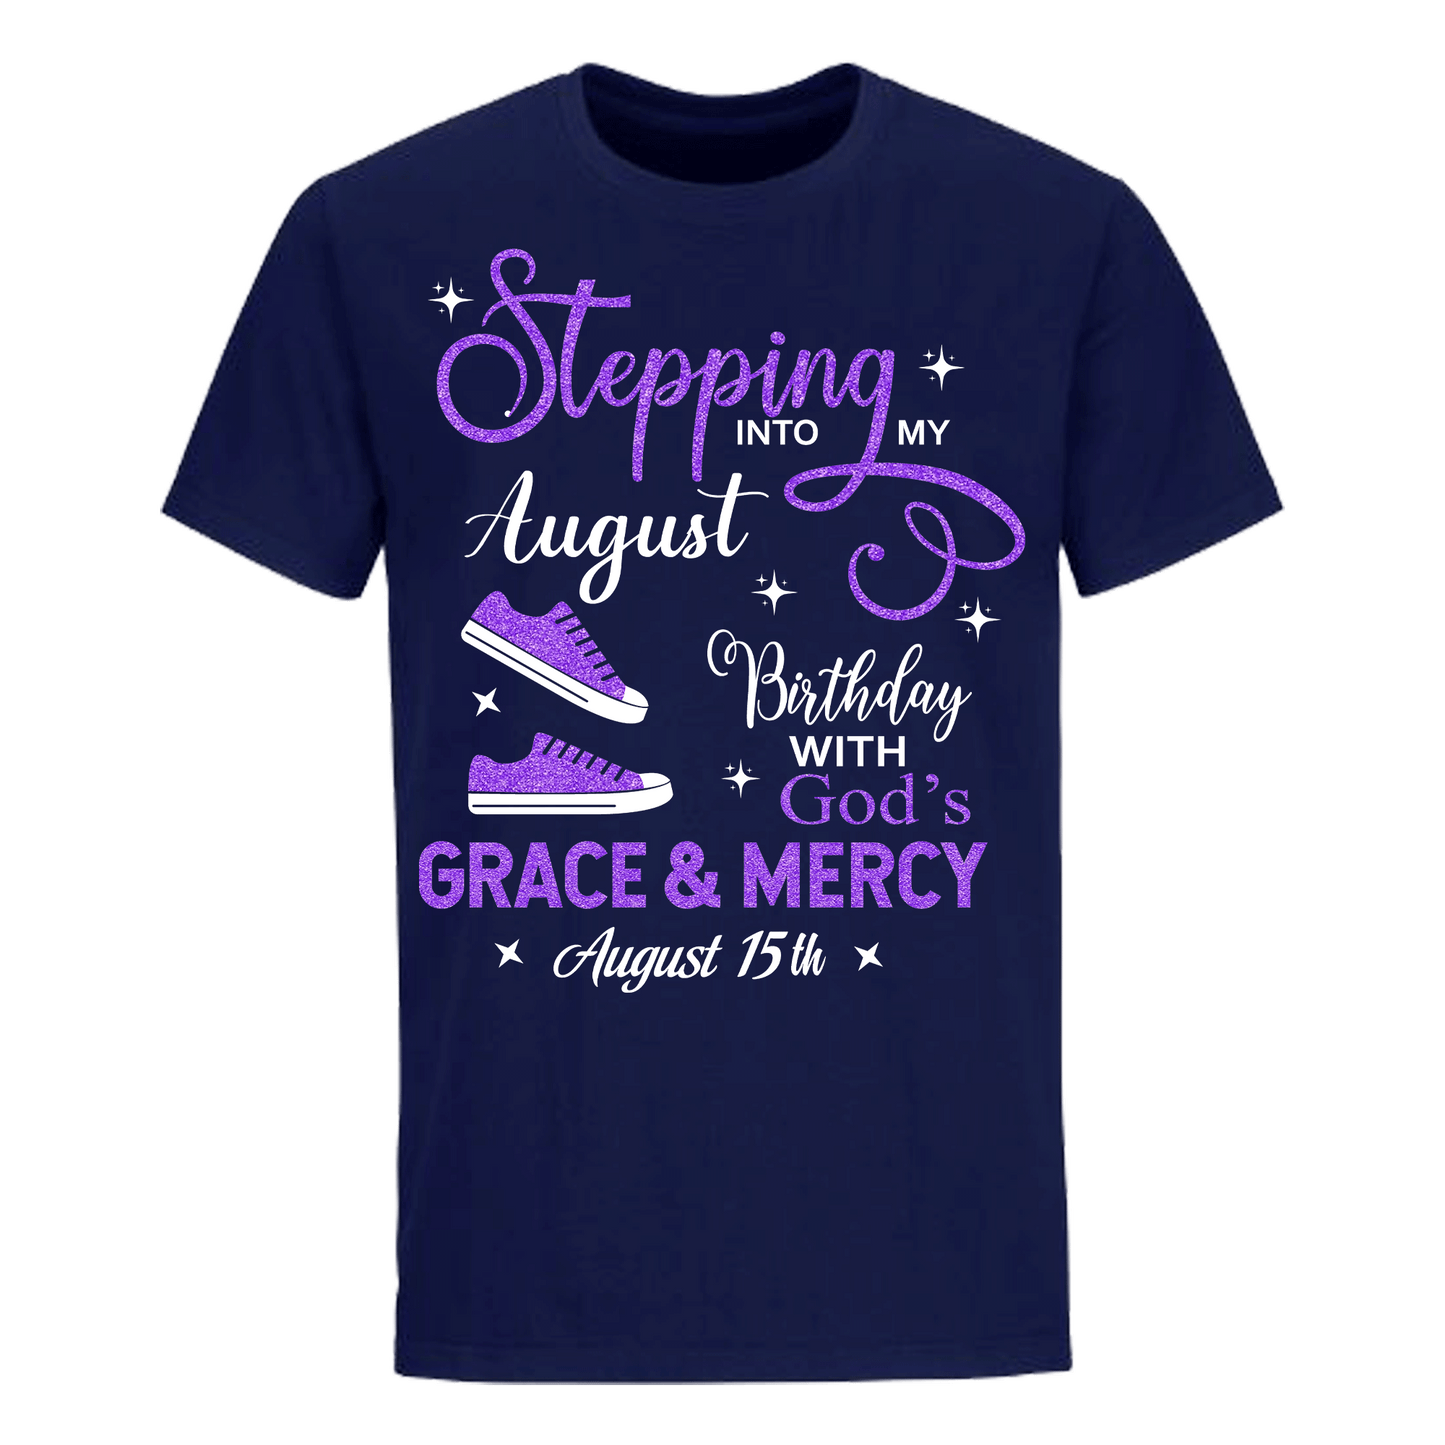 AUGUST 15 GRACE AND MERCY